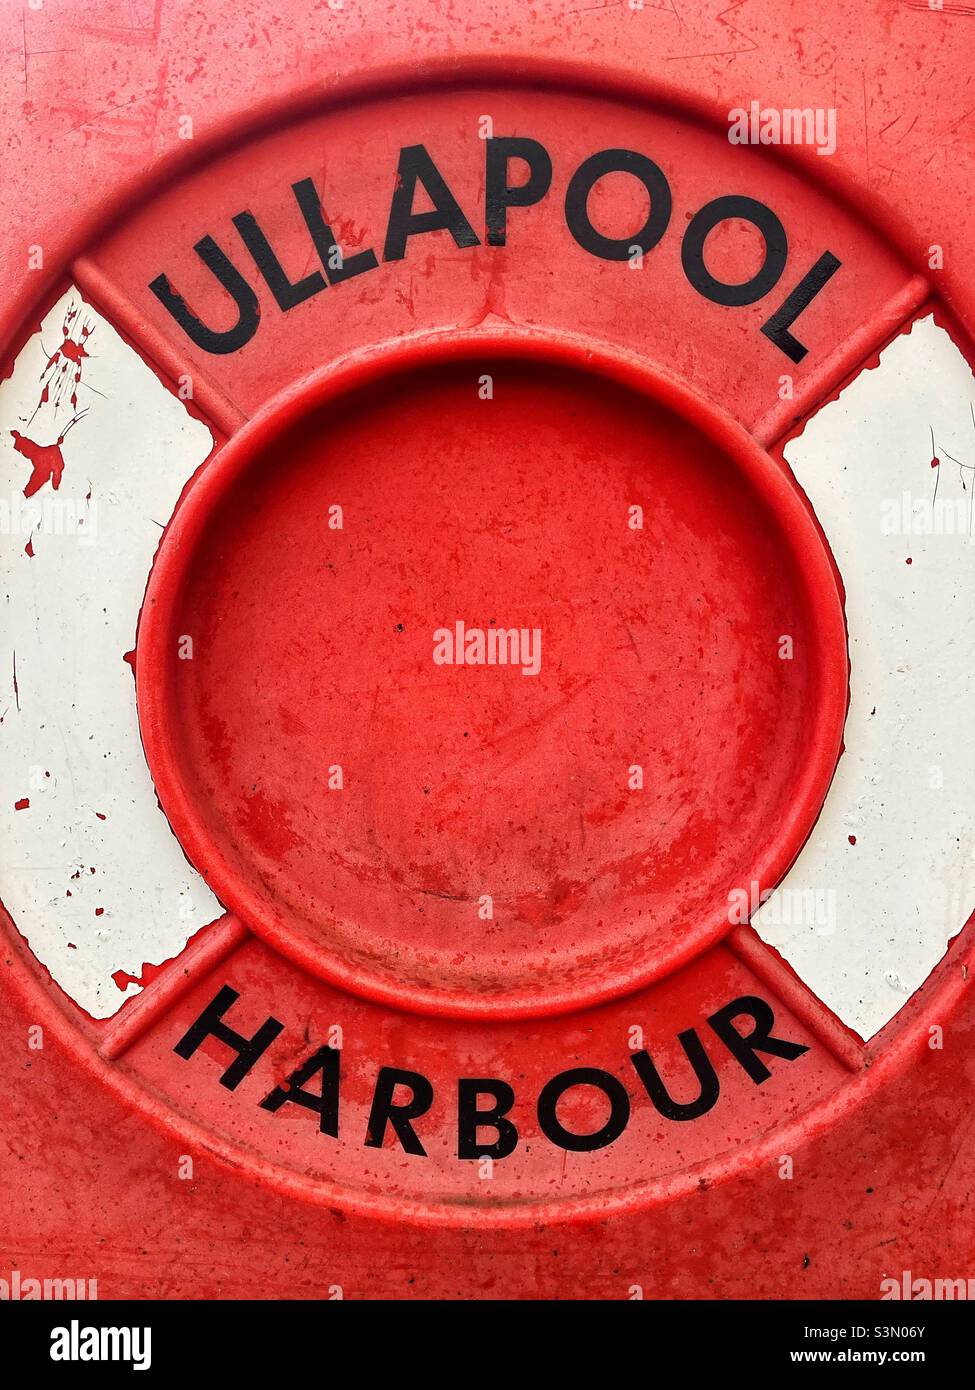 The cover of a life saving device at Ullapool Harbour in the Highlands of Scotland. Stock Photo